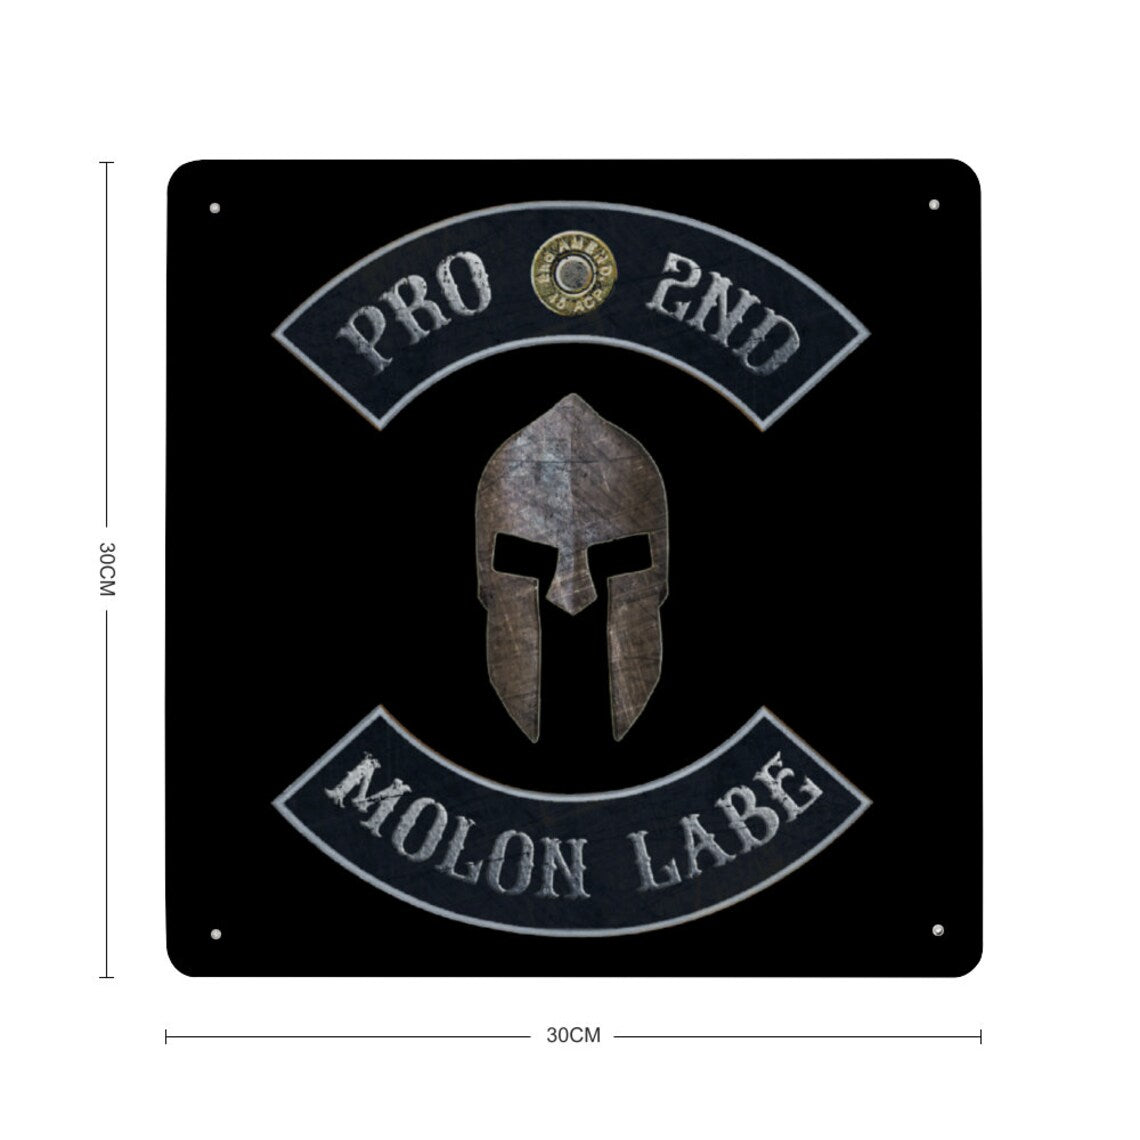 Pro 2nd Molon Labe with Spartan Helmet Print on Metal with dimensions